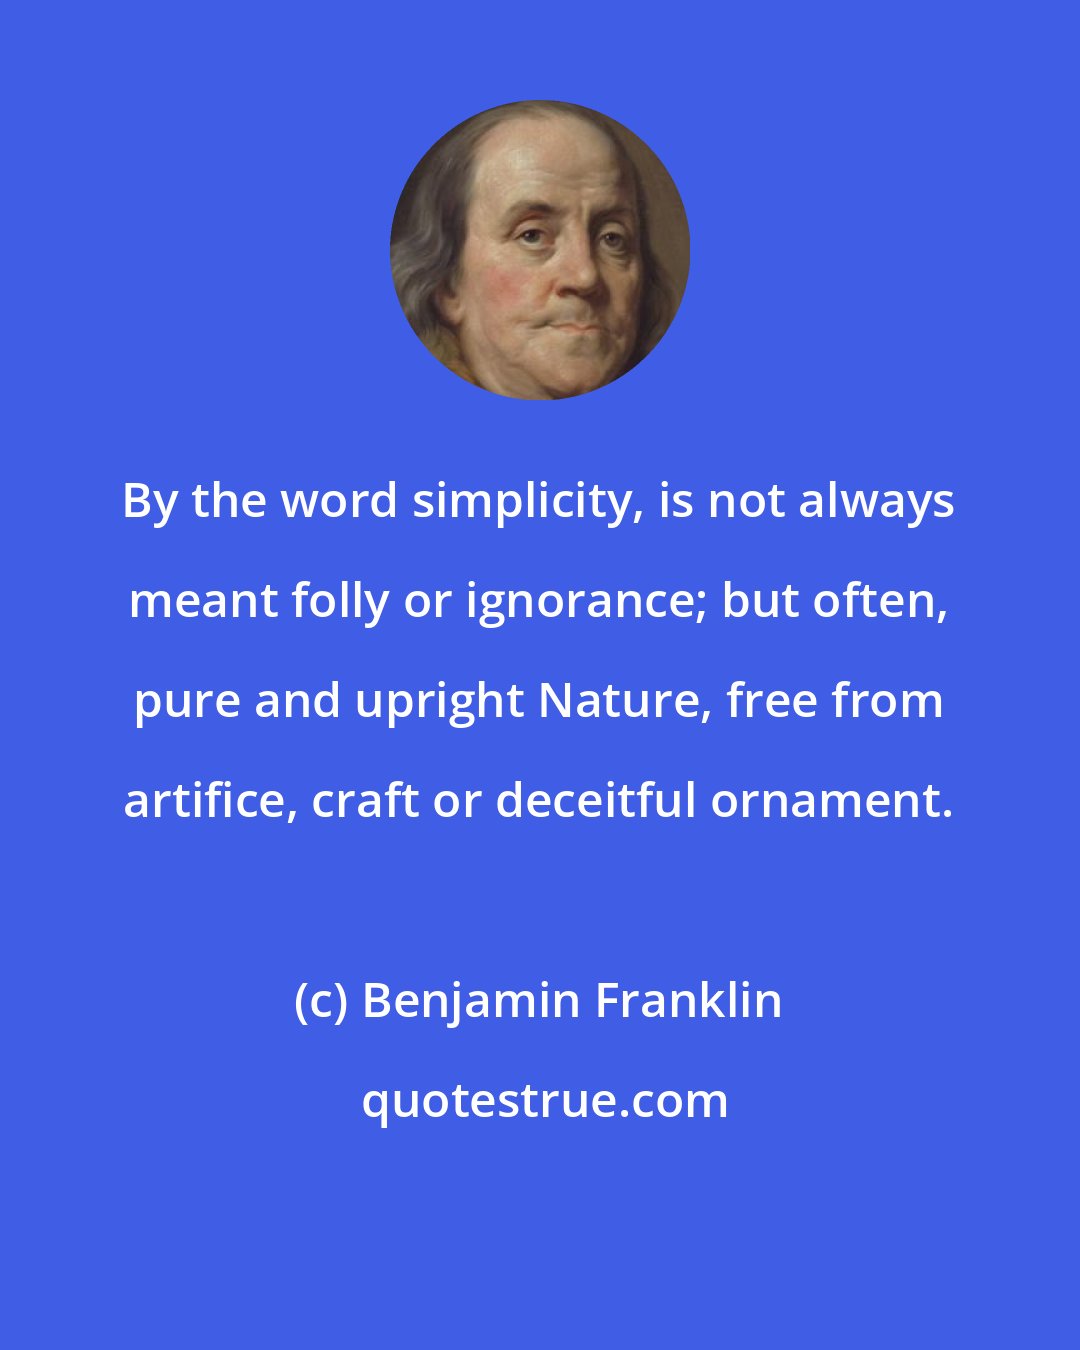 Benjamin Franklin: By the word simplicity, is not always meant folly or ignorance; but often, pure and upright Nature, free from artifice, craft or deceitful ornament.